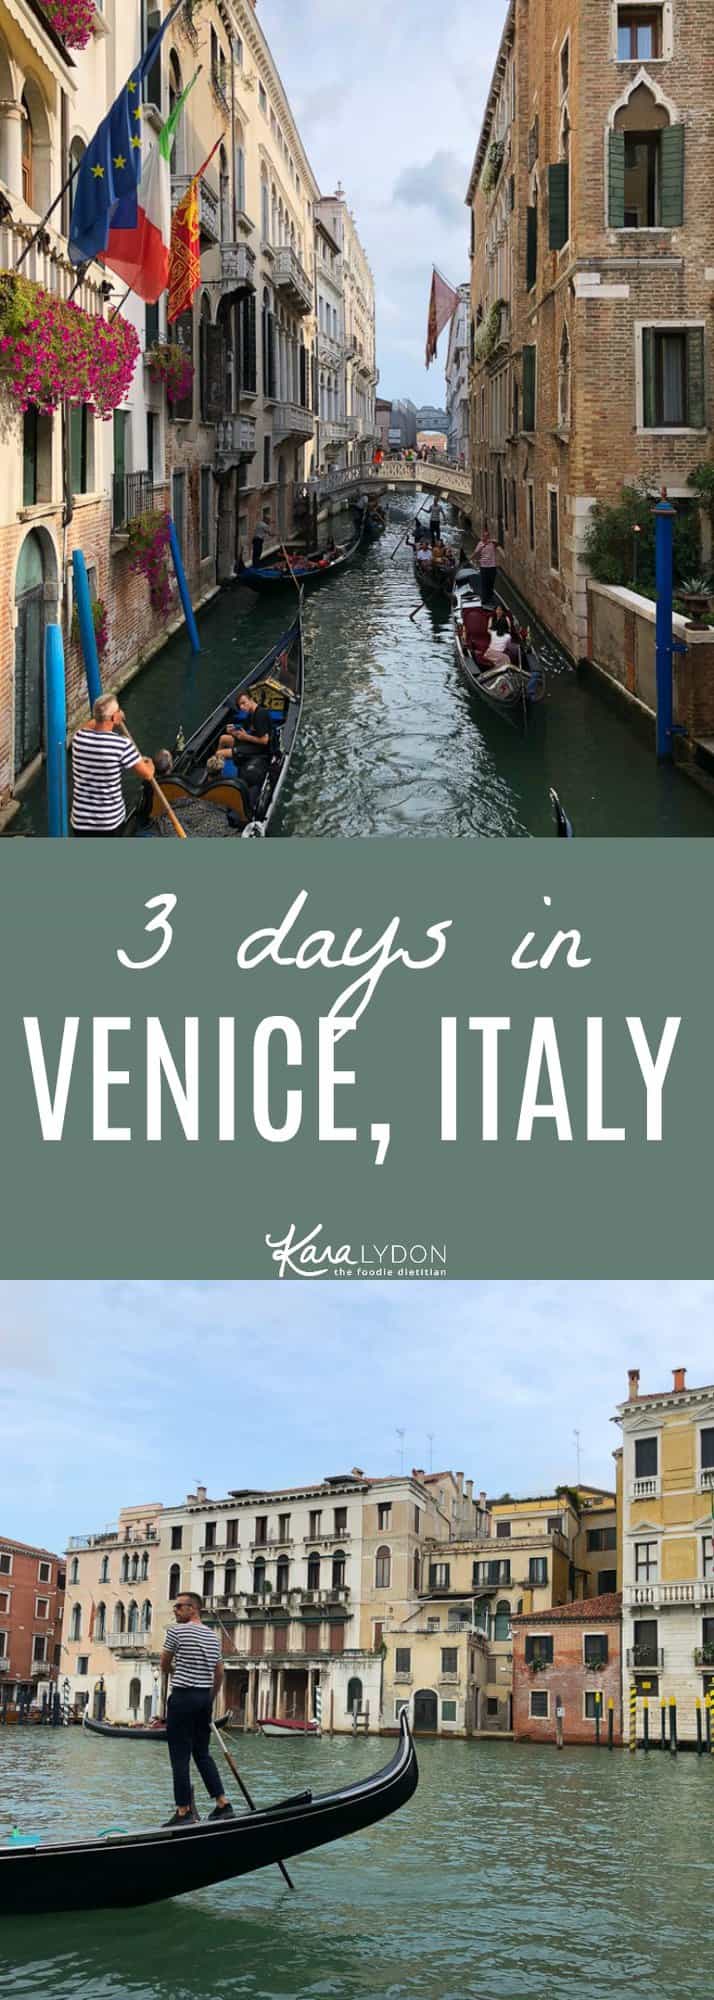 Recapping our 3 days in Venice, Italy. Where to stay, eat and visit! #travel #venice #italy